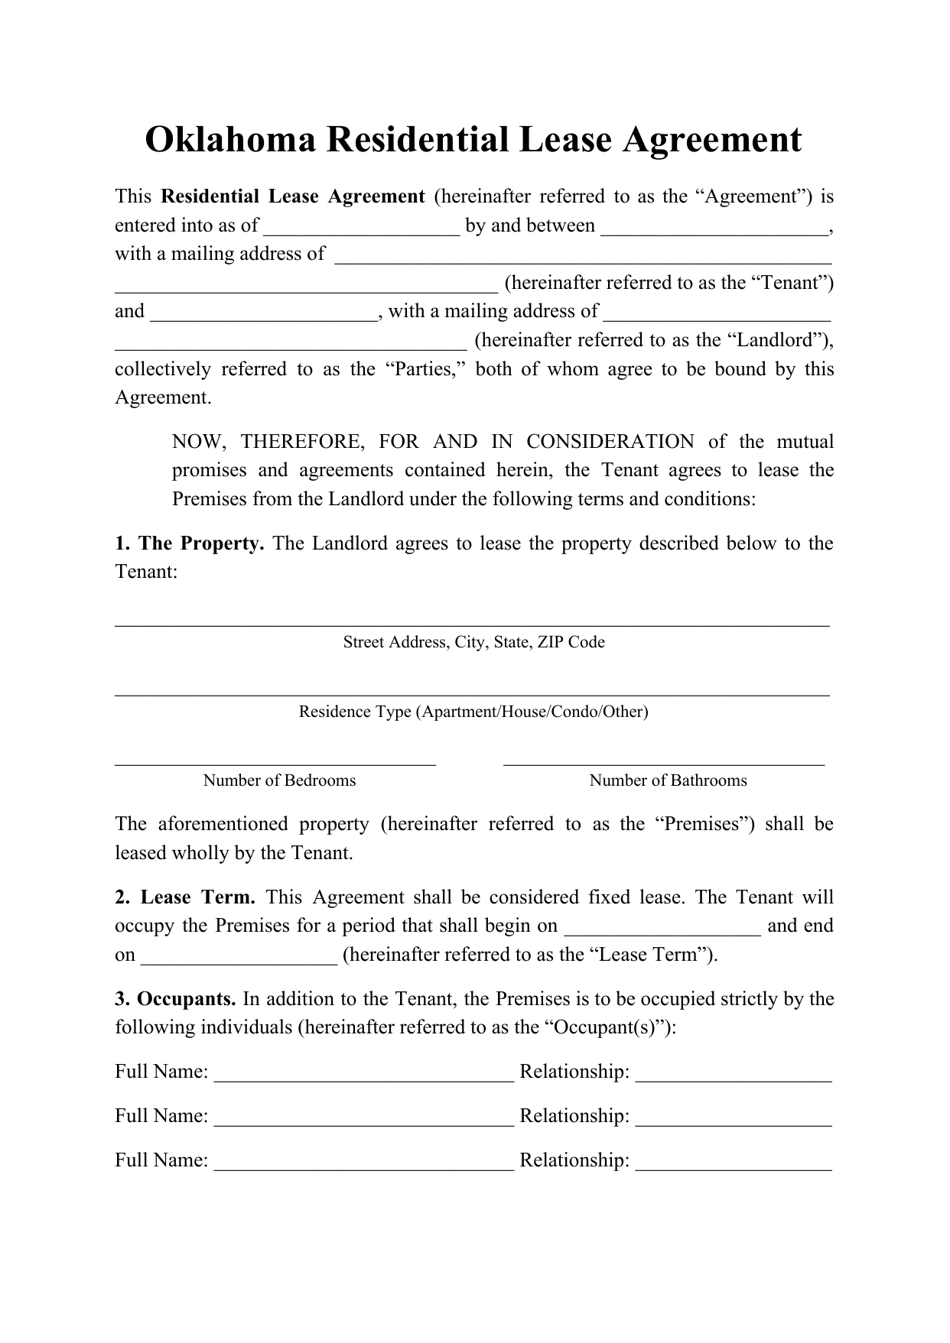 Oklahoma Residential Lease Agreement Template Fill Out Sign Online And Download PDF